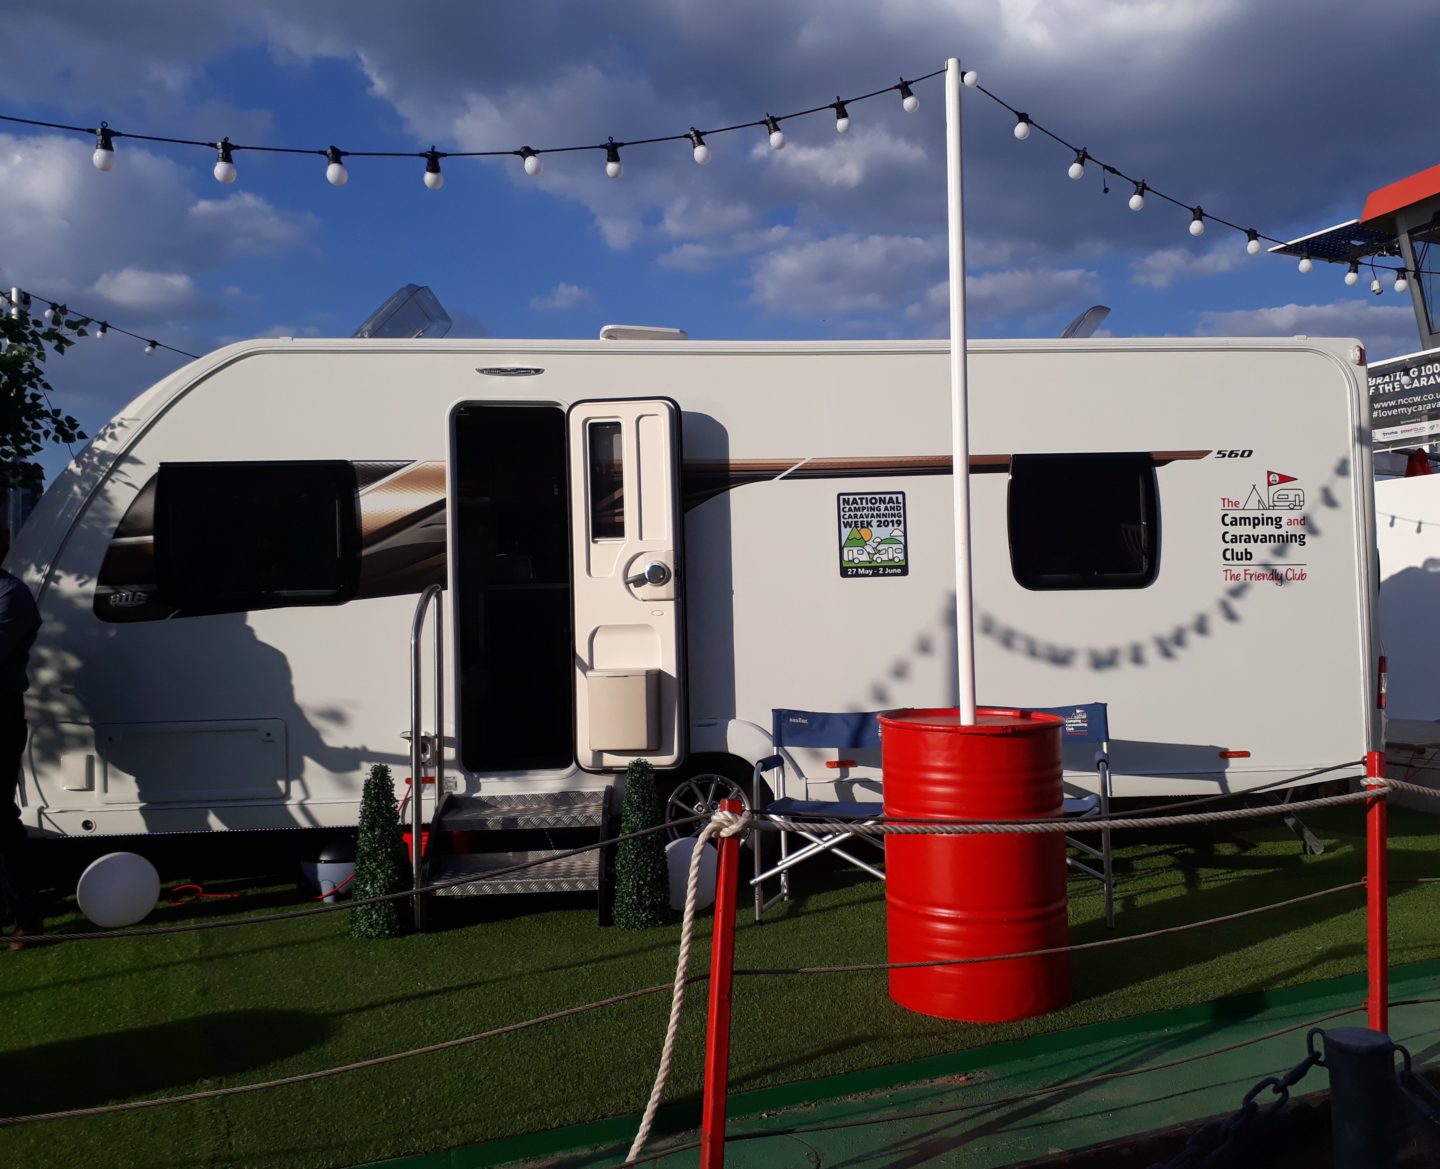 National Camping and Caravanning Week 2019 also celebrated the Eccles Caravans 100th birthday